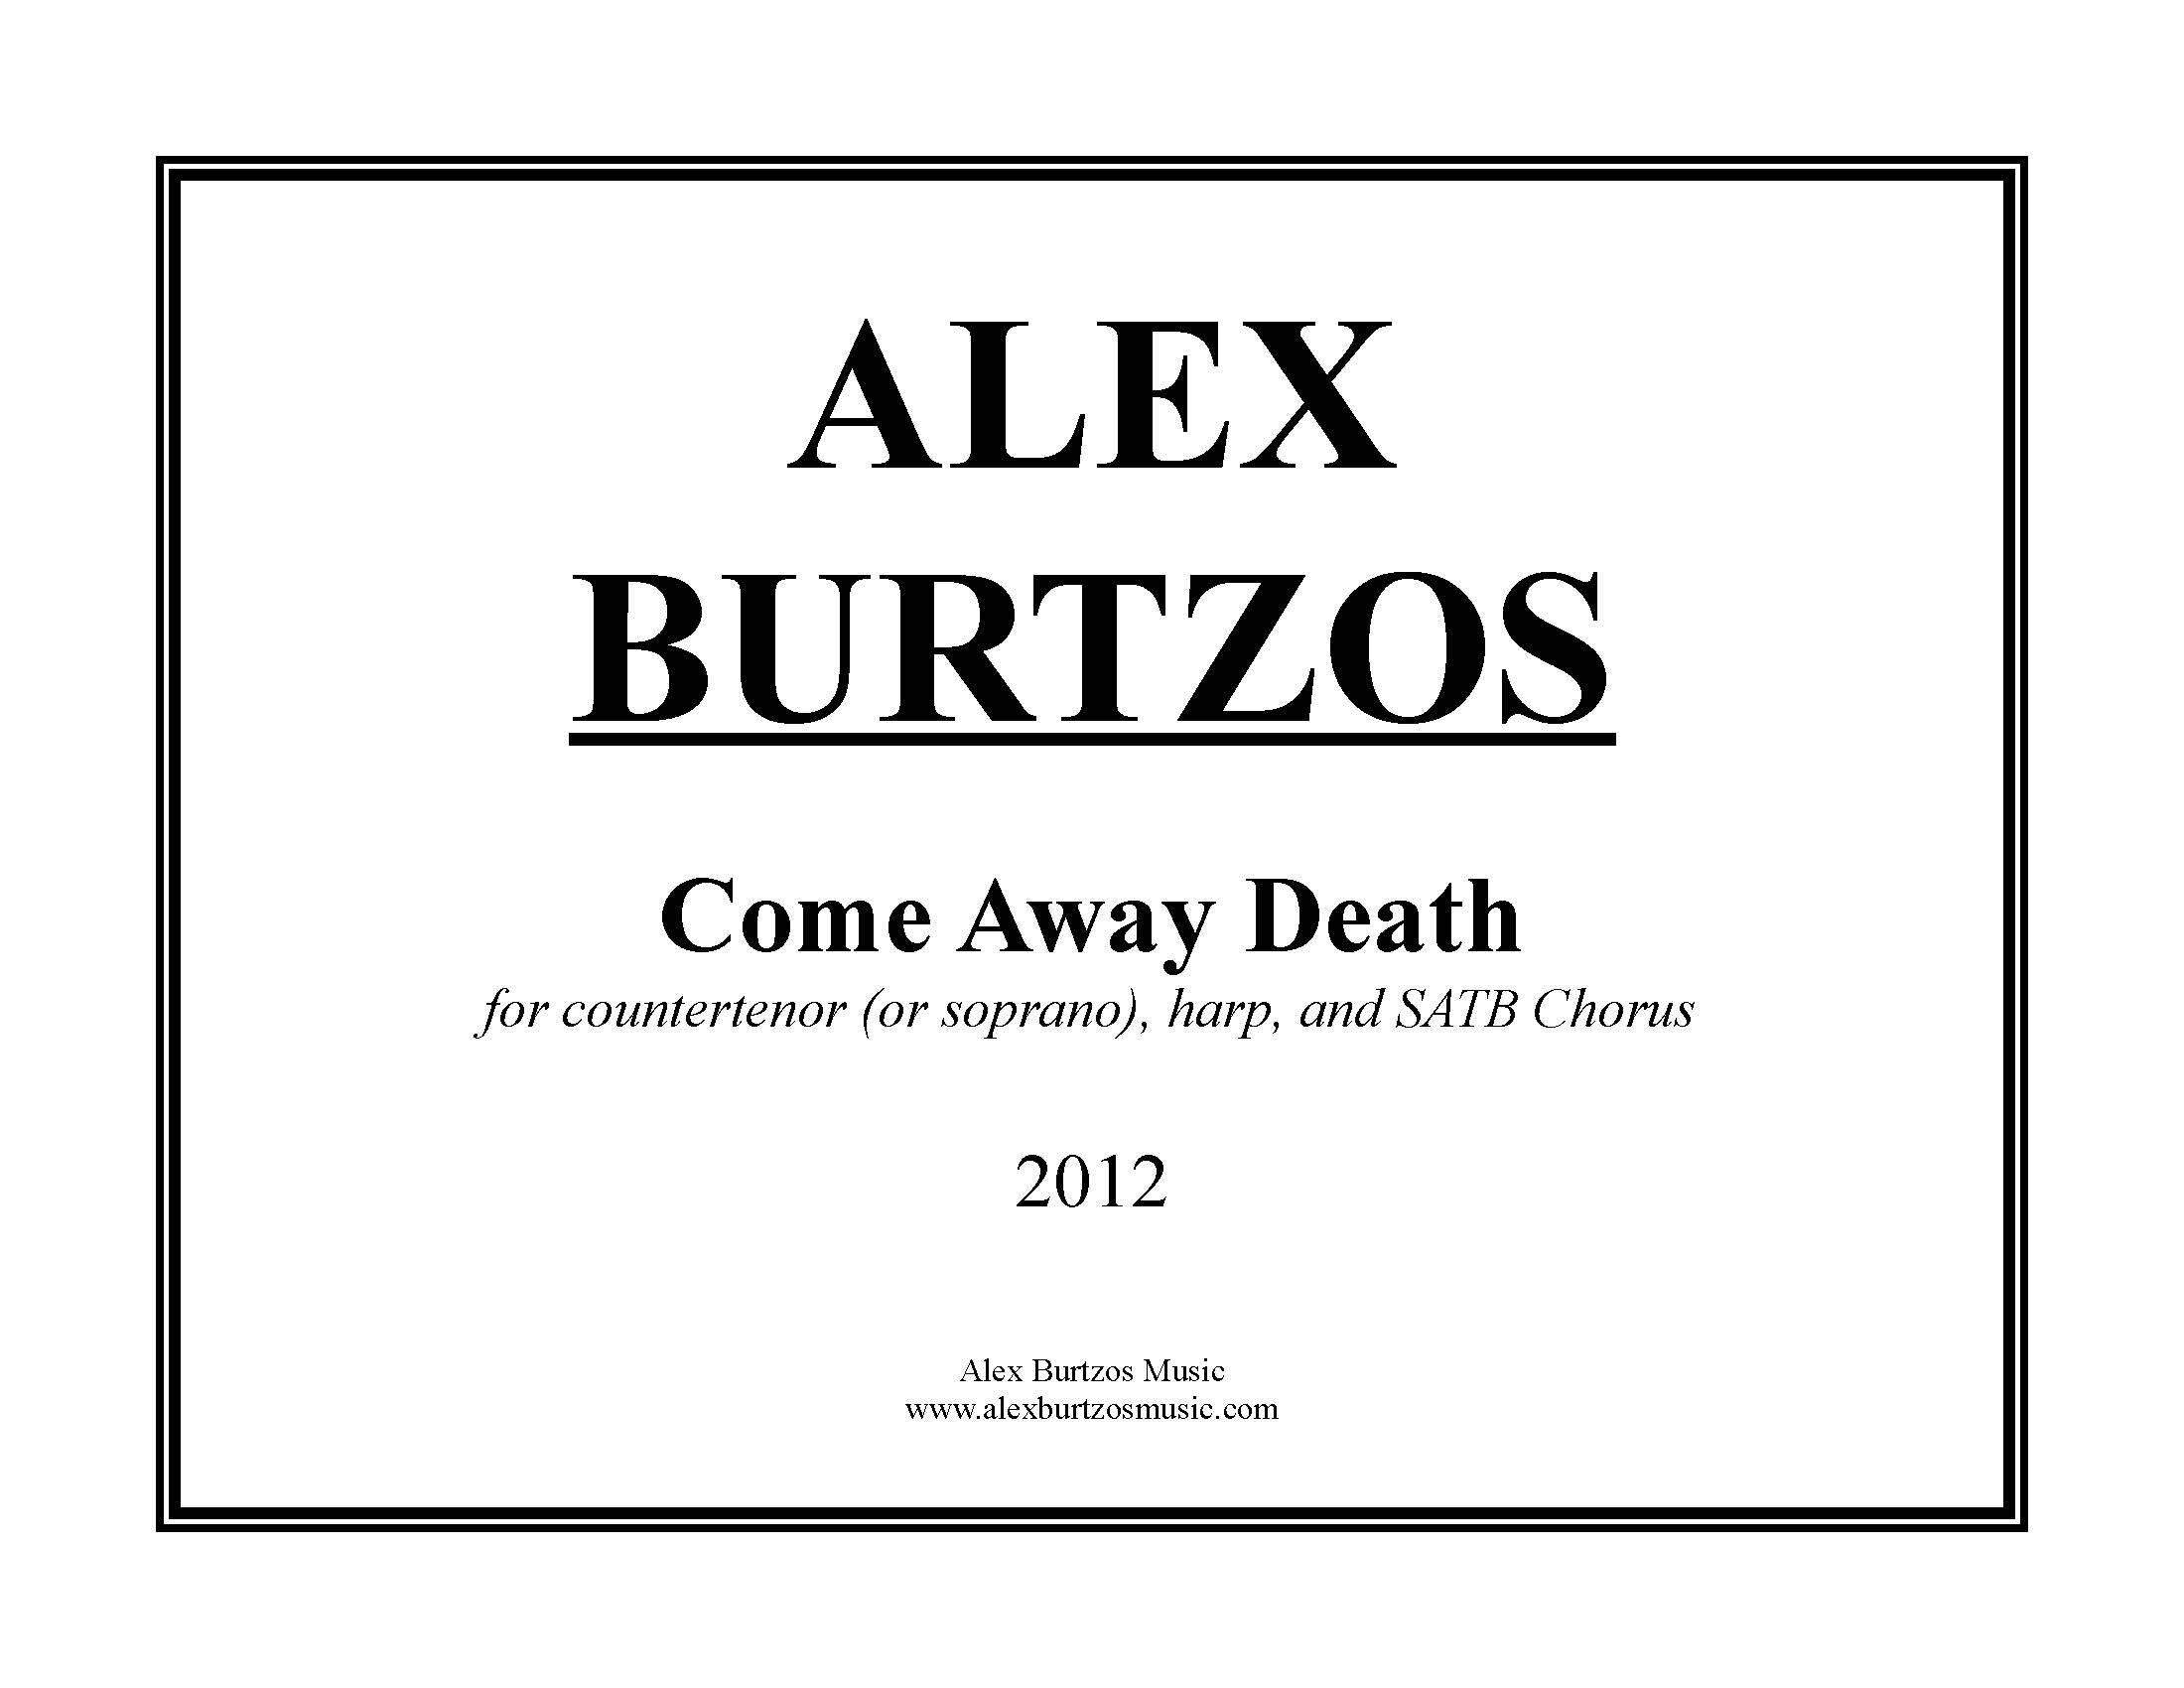 Come Away Death - Complete Score_Page_01.jpg